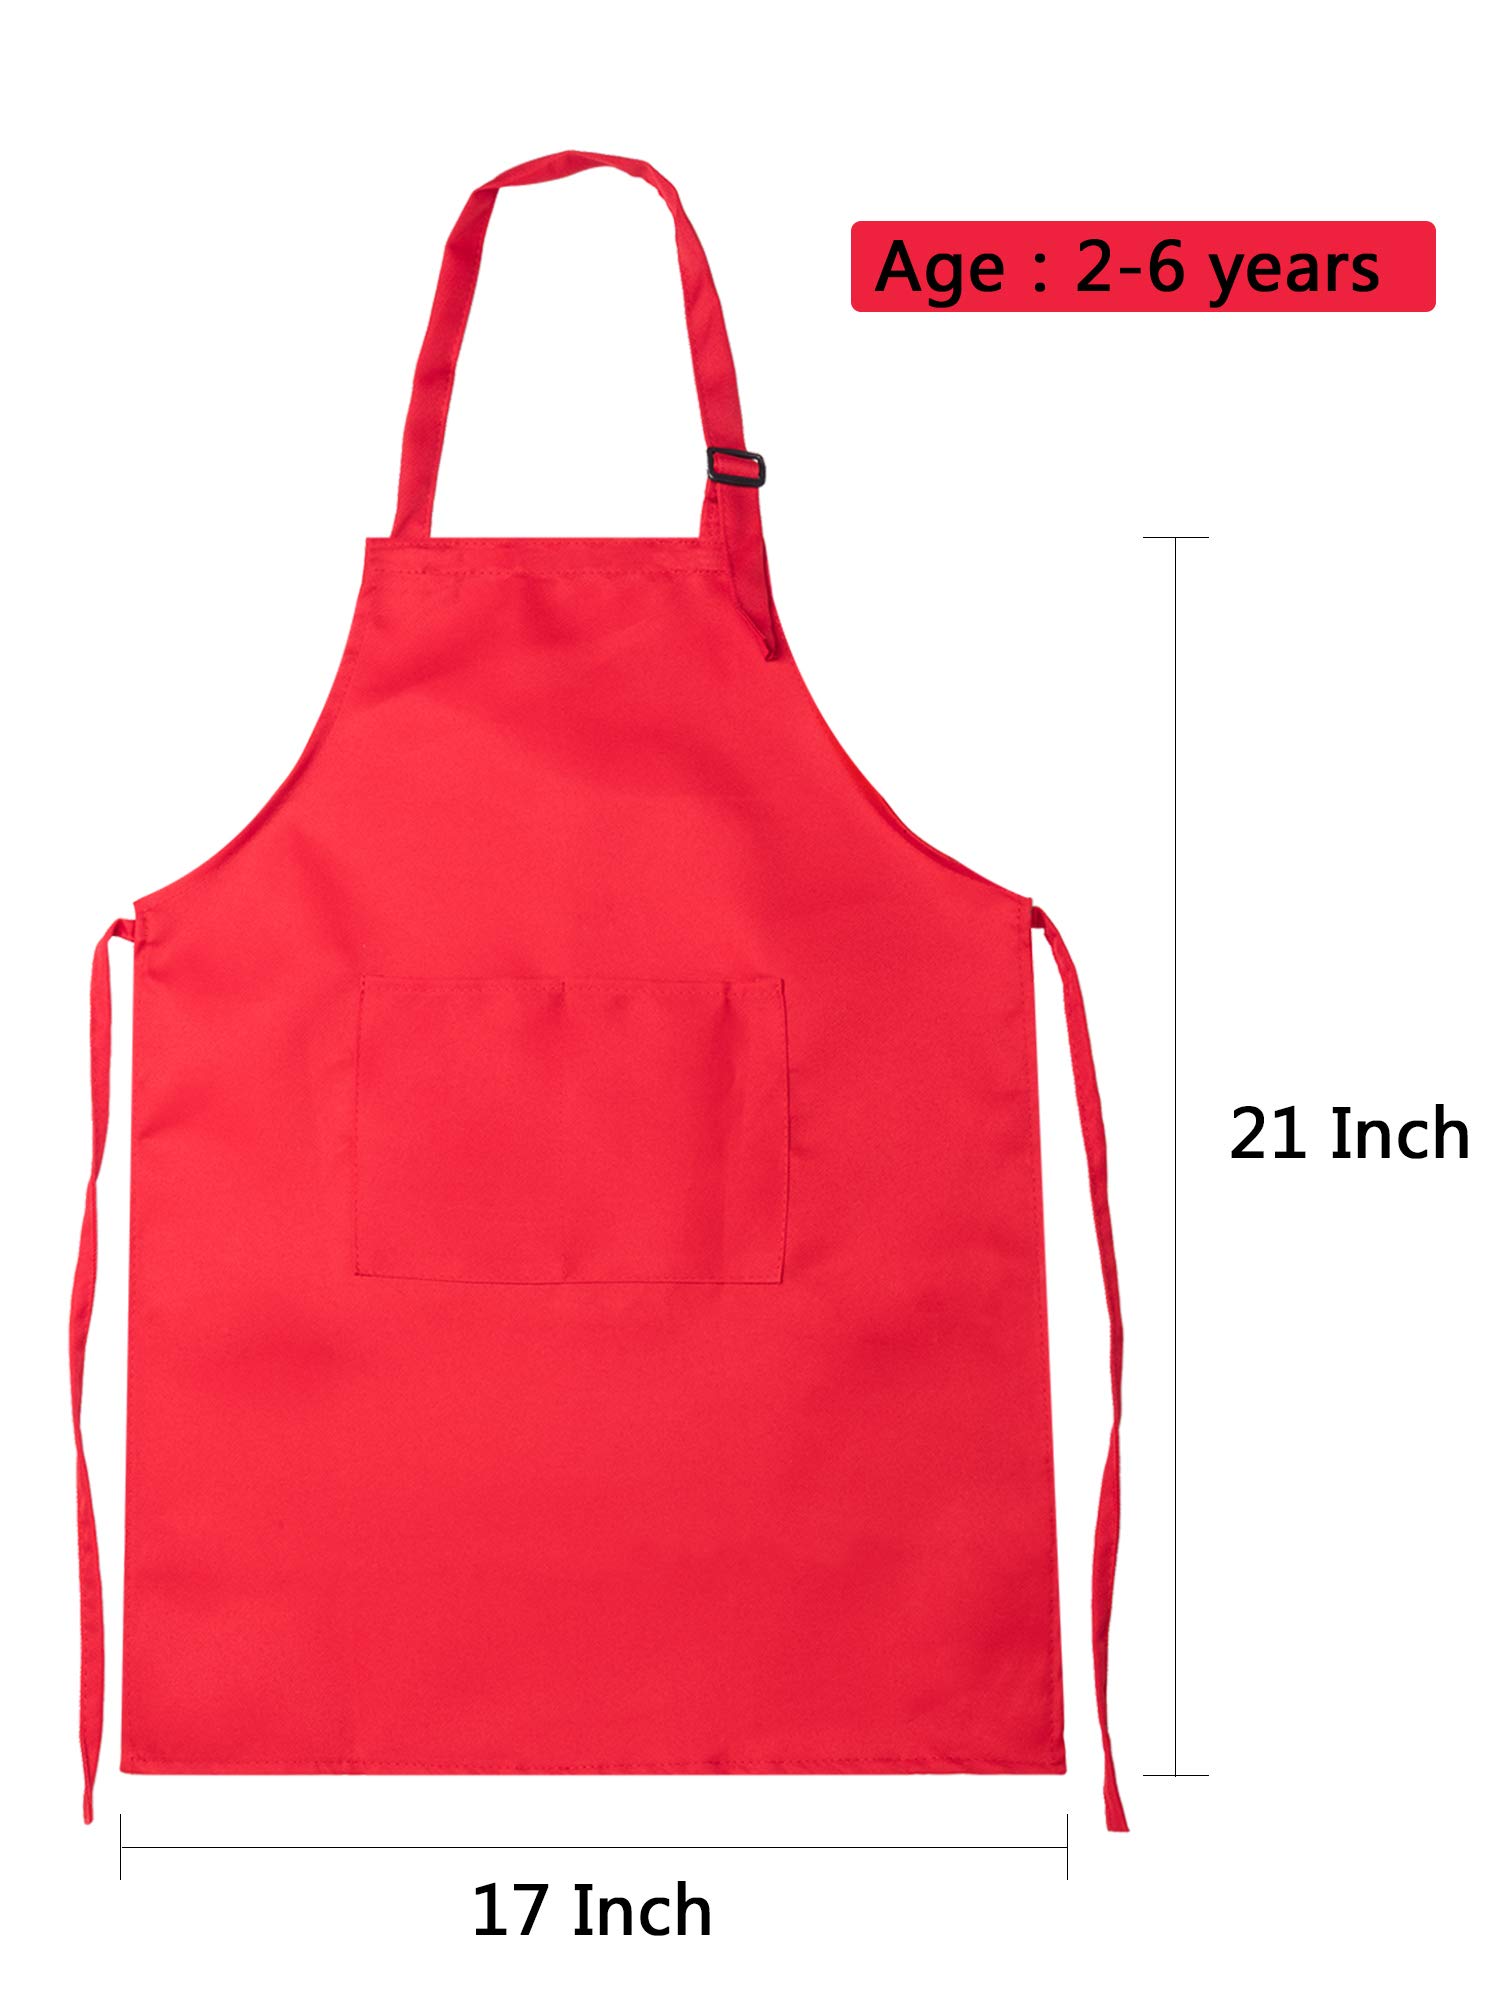 SATINIOR 12 Pieces Kids Aprons Chef Hats Adjustable Child Aprons with Pockets Kitchen Bib